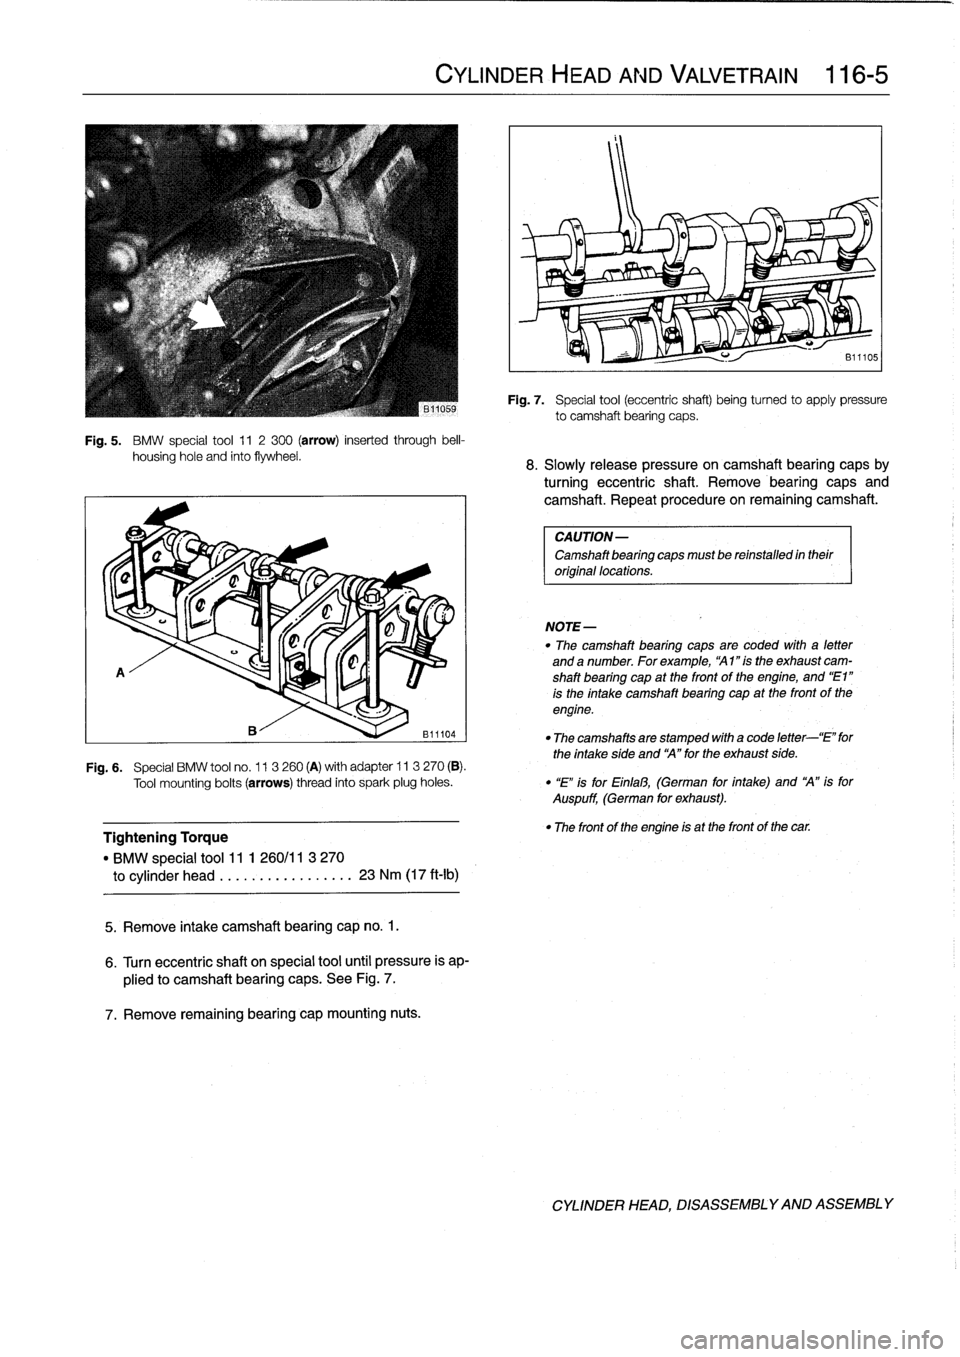 BMW M3 1993 E36 Owners Manual 
Fig
.
5
.

	

BMW
special
tool
11
2300
(arrow)
inserted
through
bell-
housing
hole
and
finto
flywheel
.

A

Tightening
Torque

"
BMW
special
tool11
1
260/11
3
270

to
cylinder
head
.................
